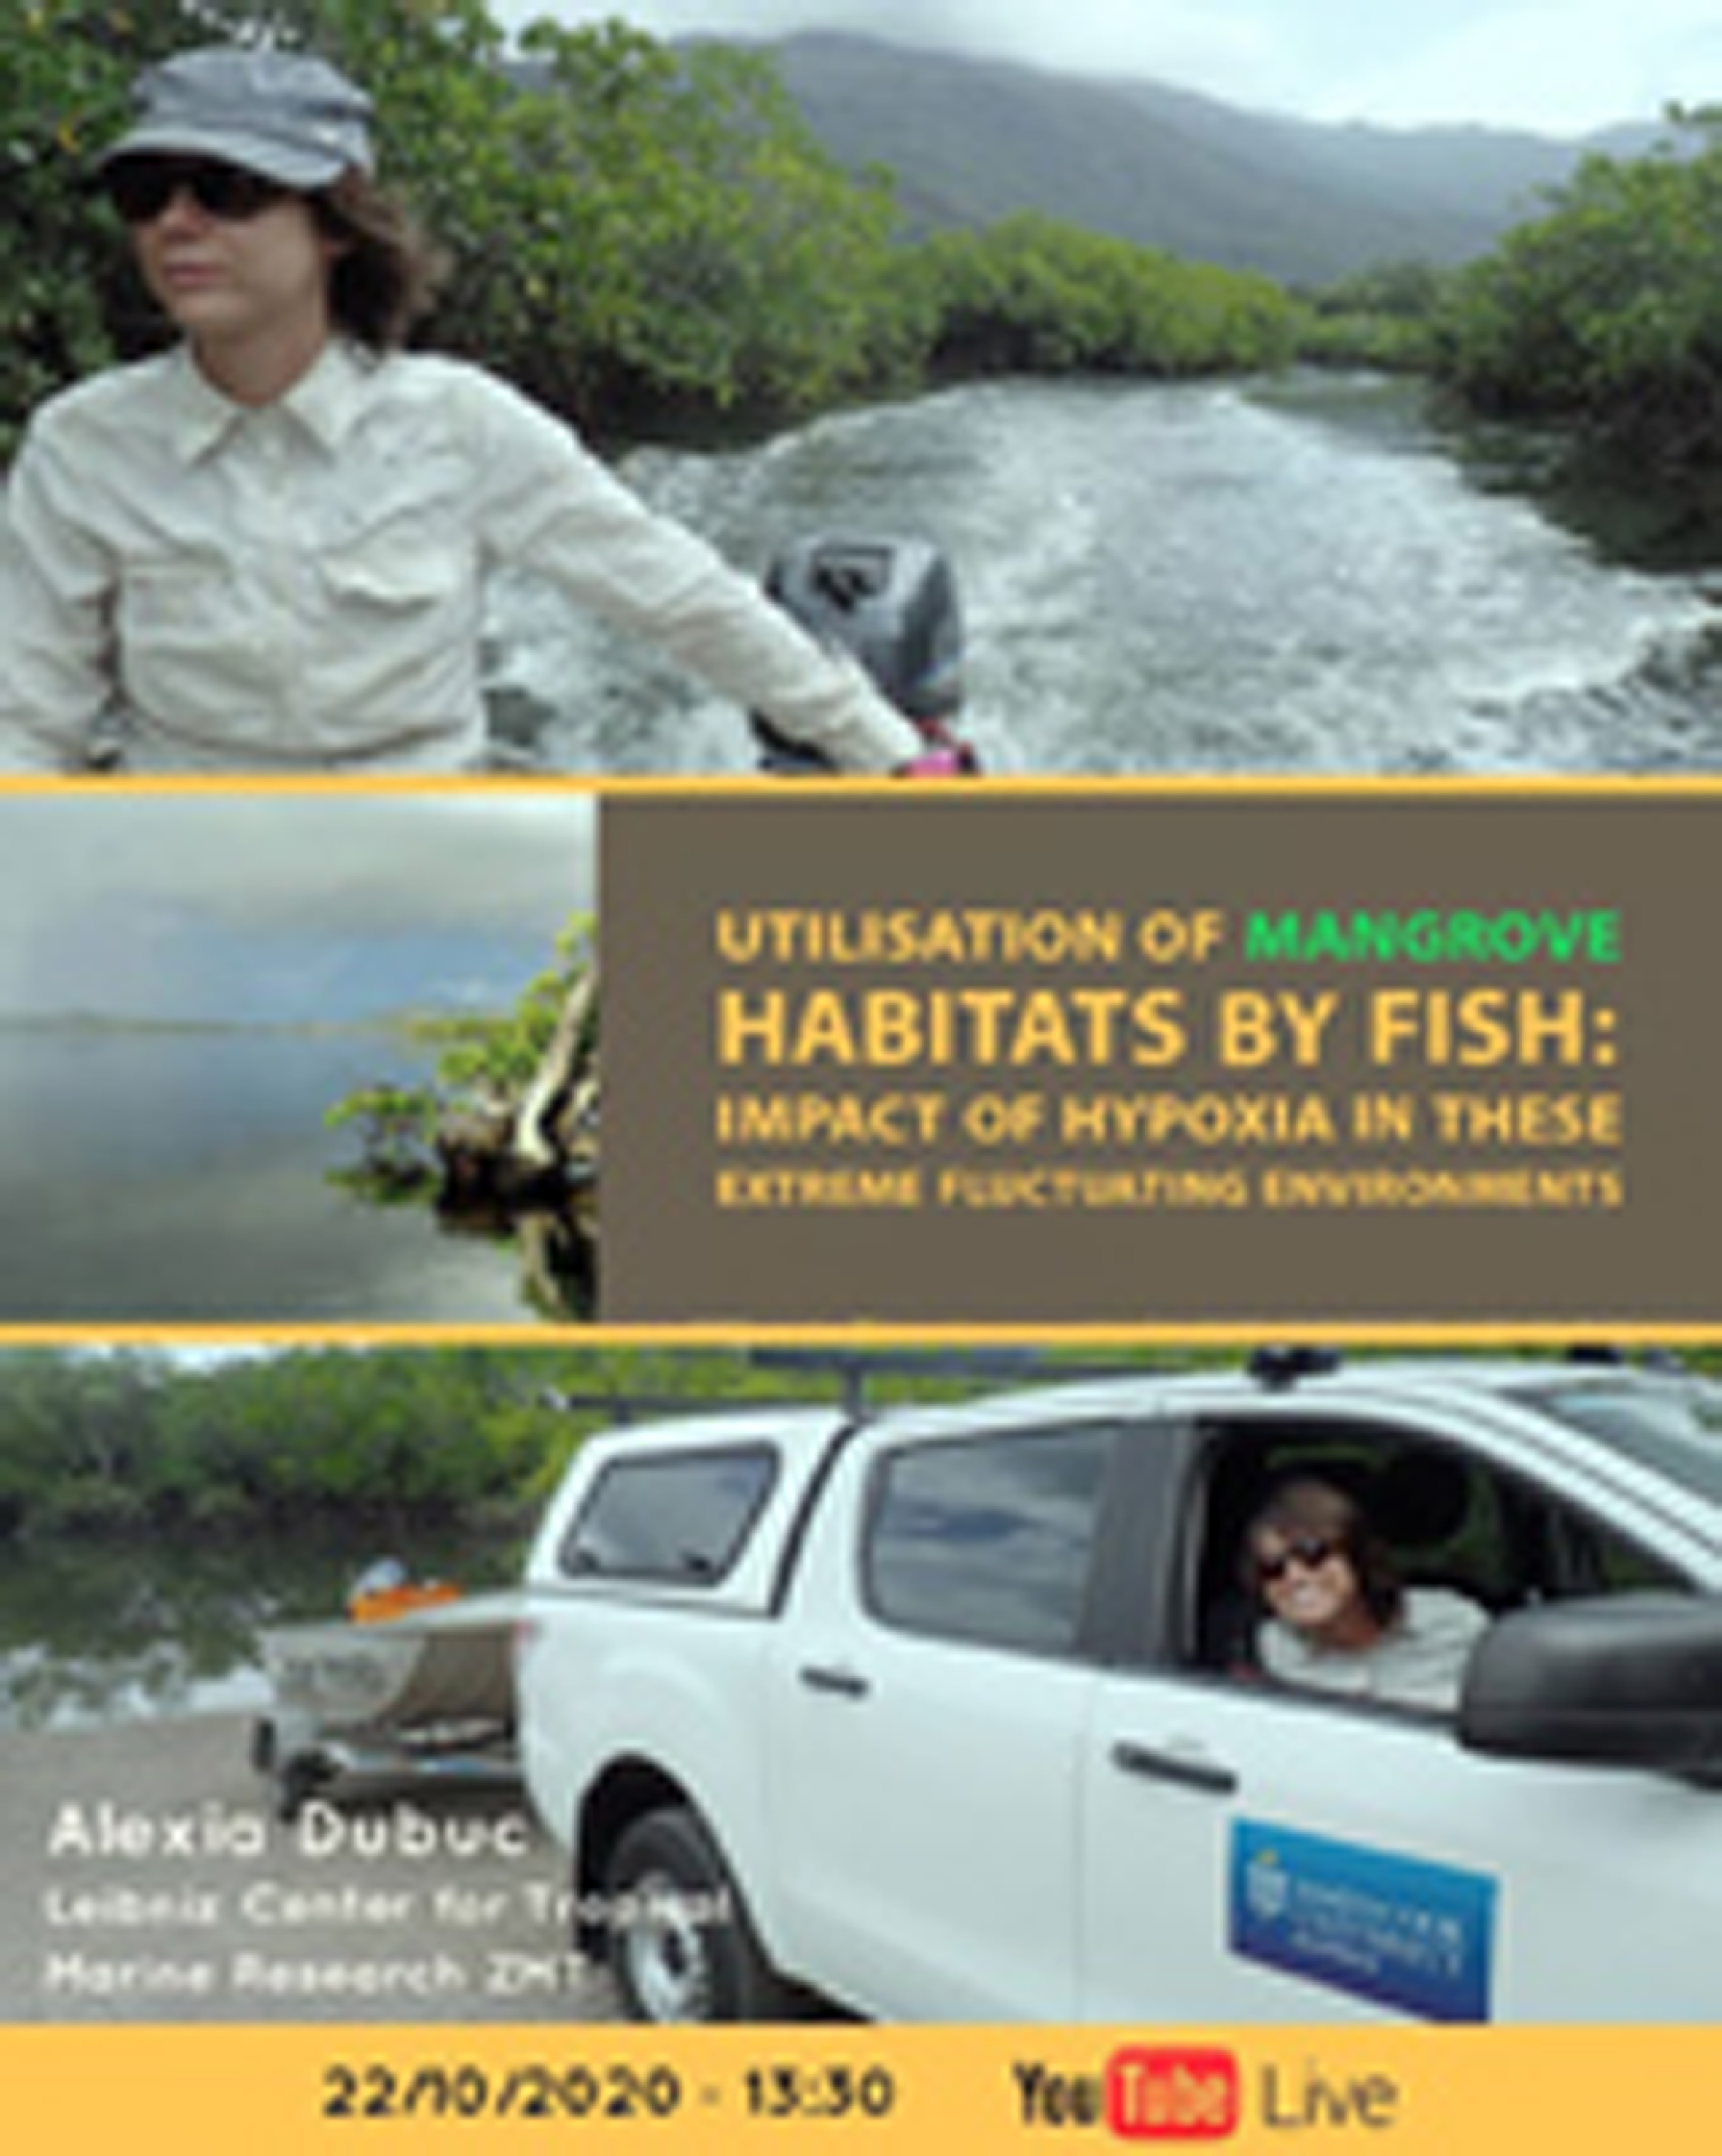 CEBIMário: Utilisation of mangrove habitats by fish: impact of hypoxia in these extreme fluctuating environments